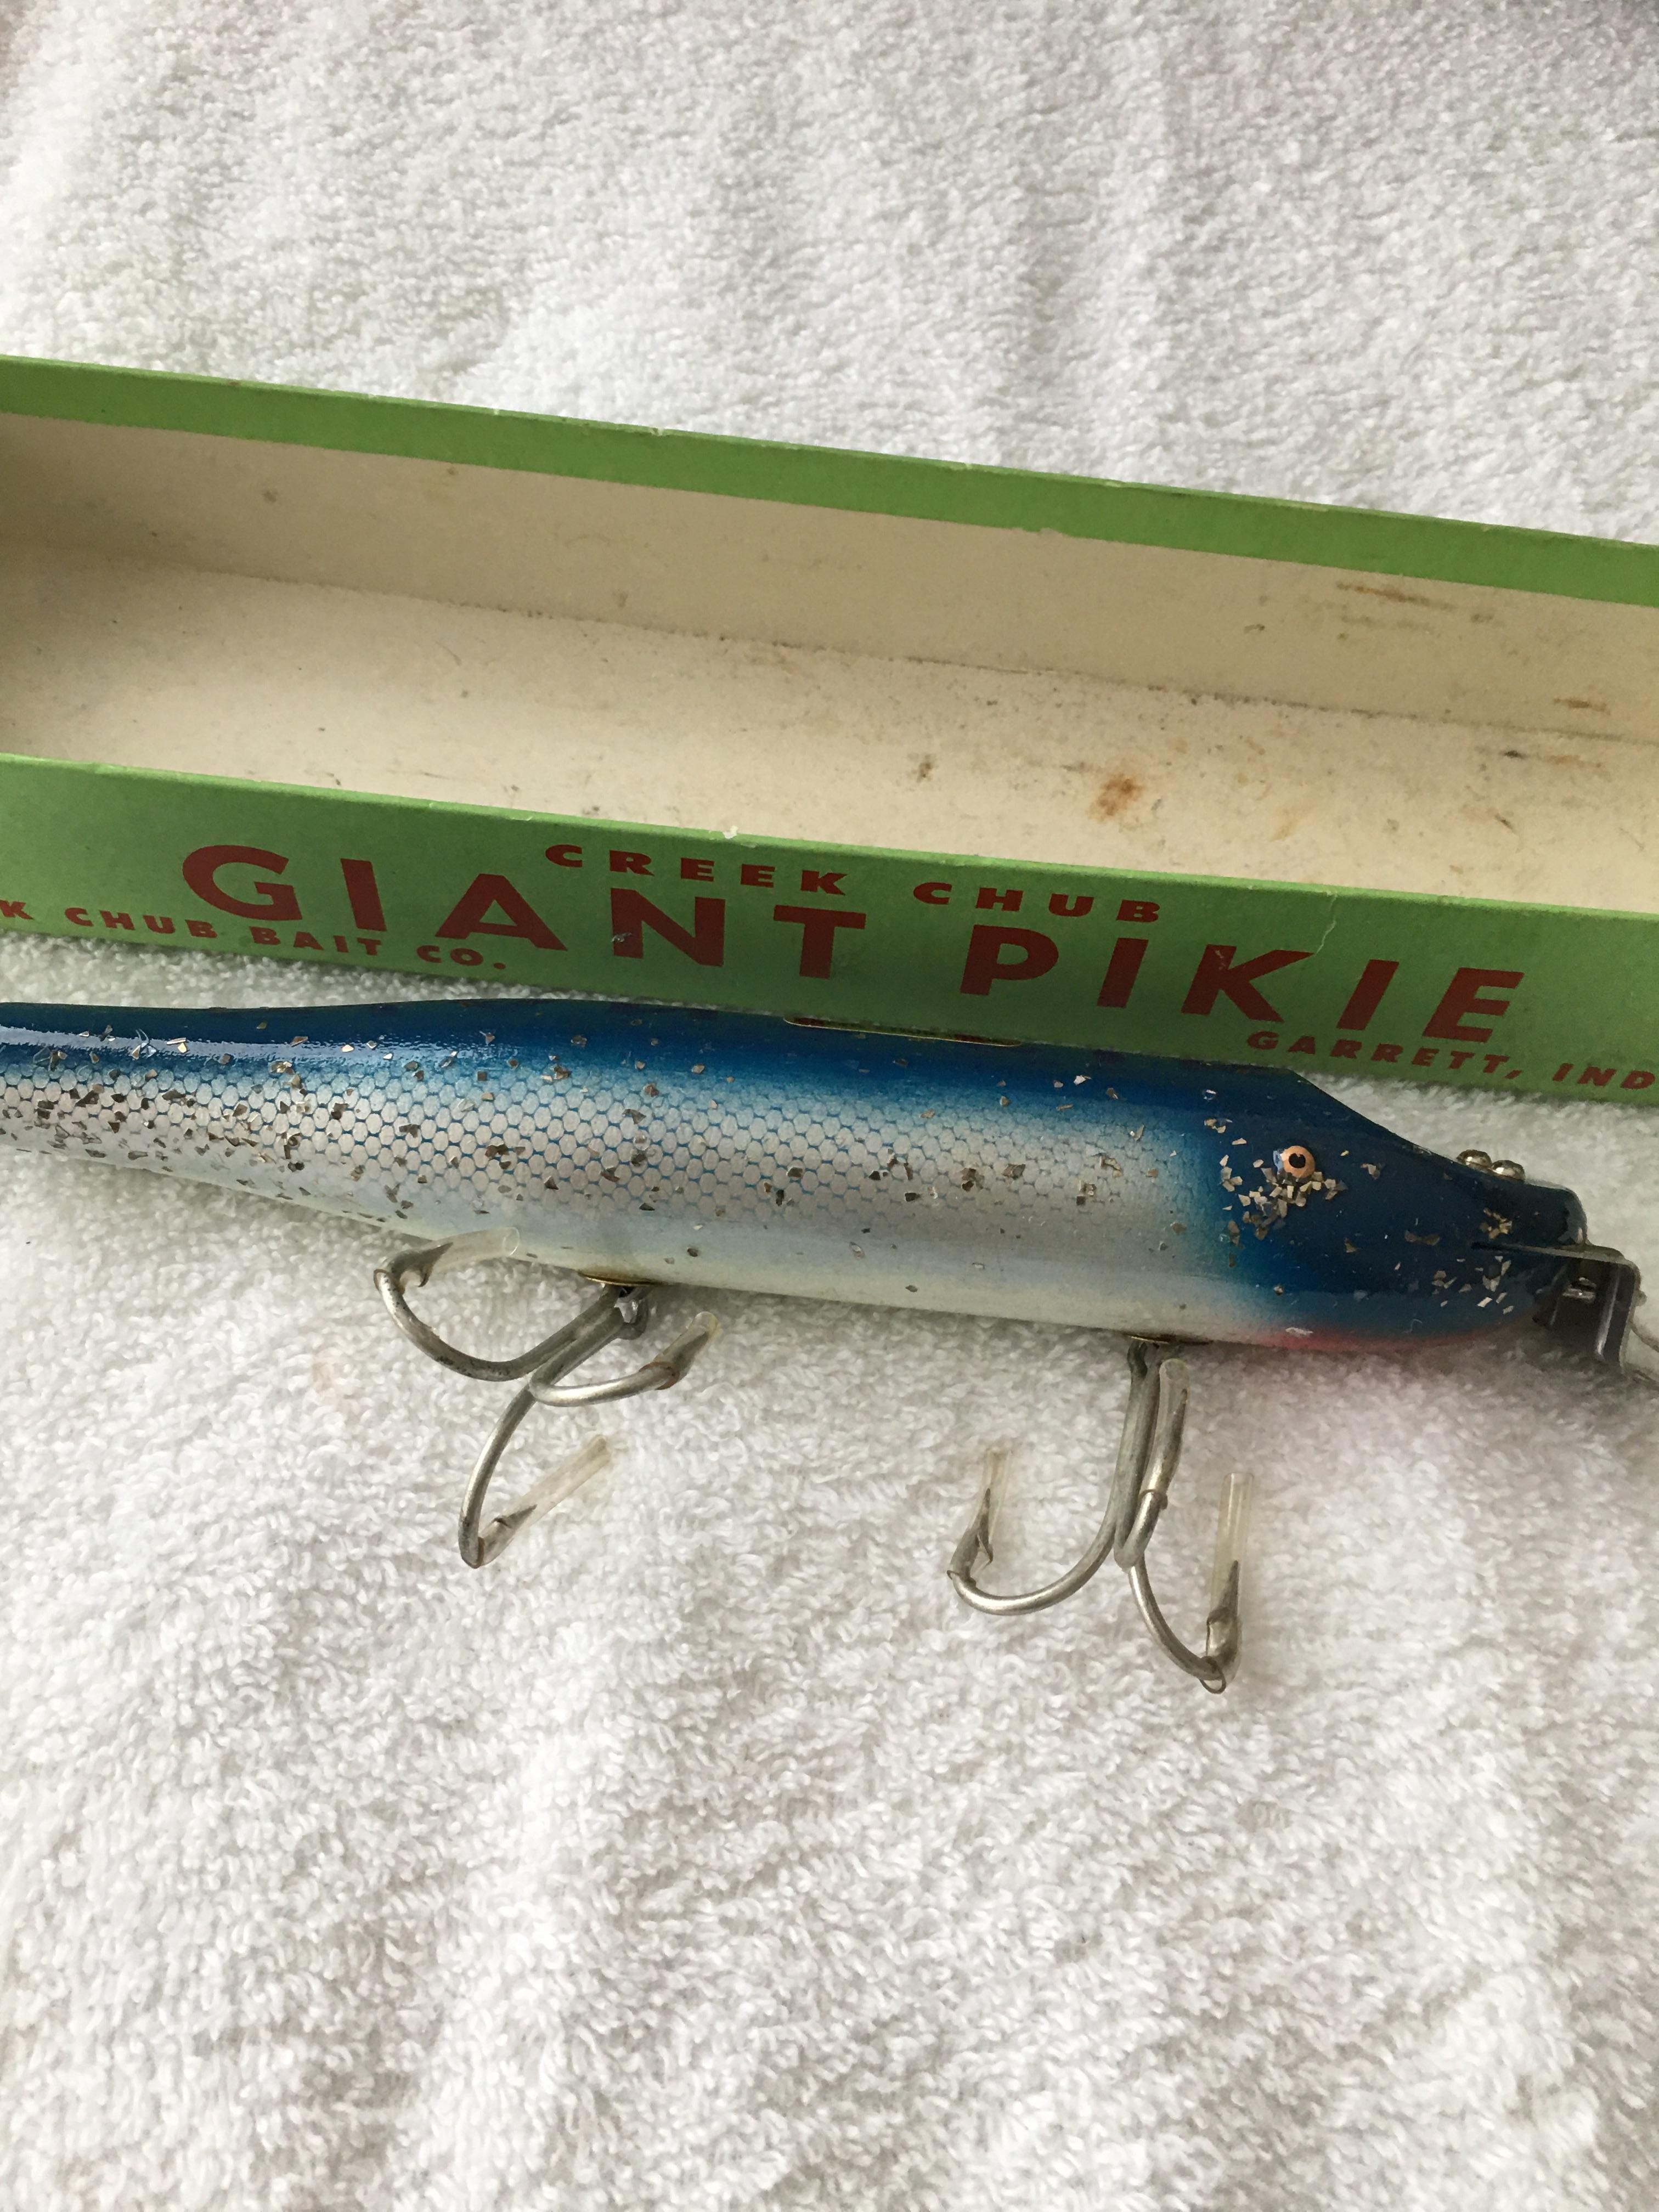 VINTAGE CREEK CHUB GIANT PIKIE LURE IN PERCH NEW IN BOX